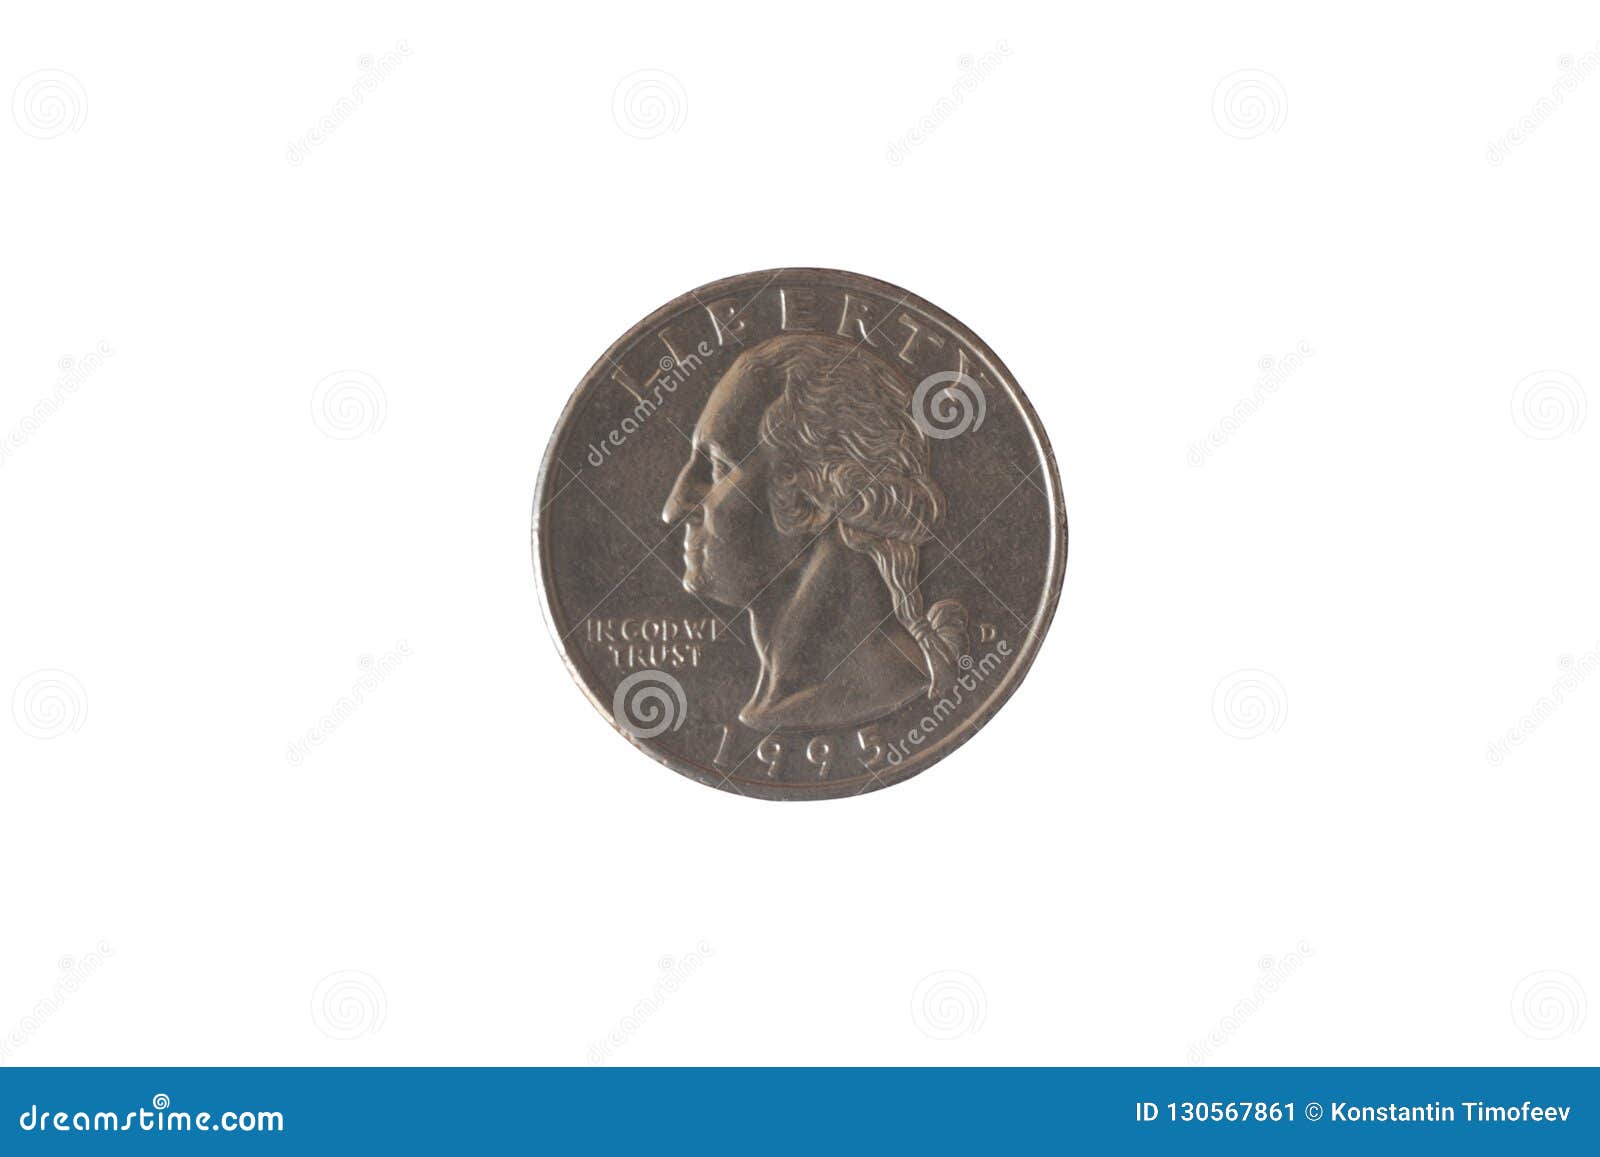 Coin Usa 25 Cents With The Image Of George Washington And Bald Eagles